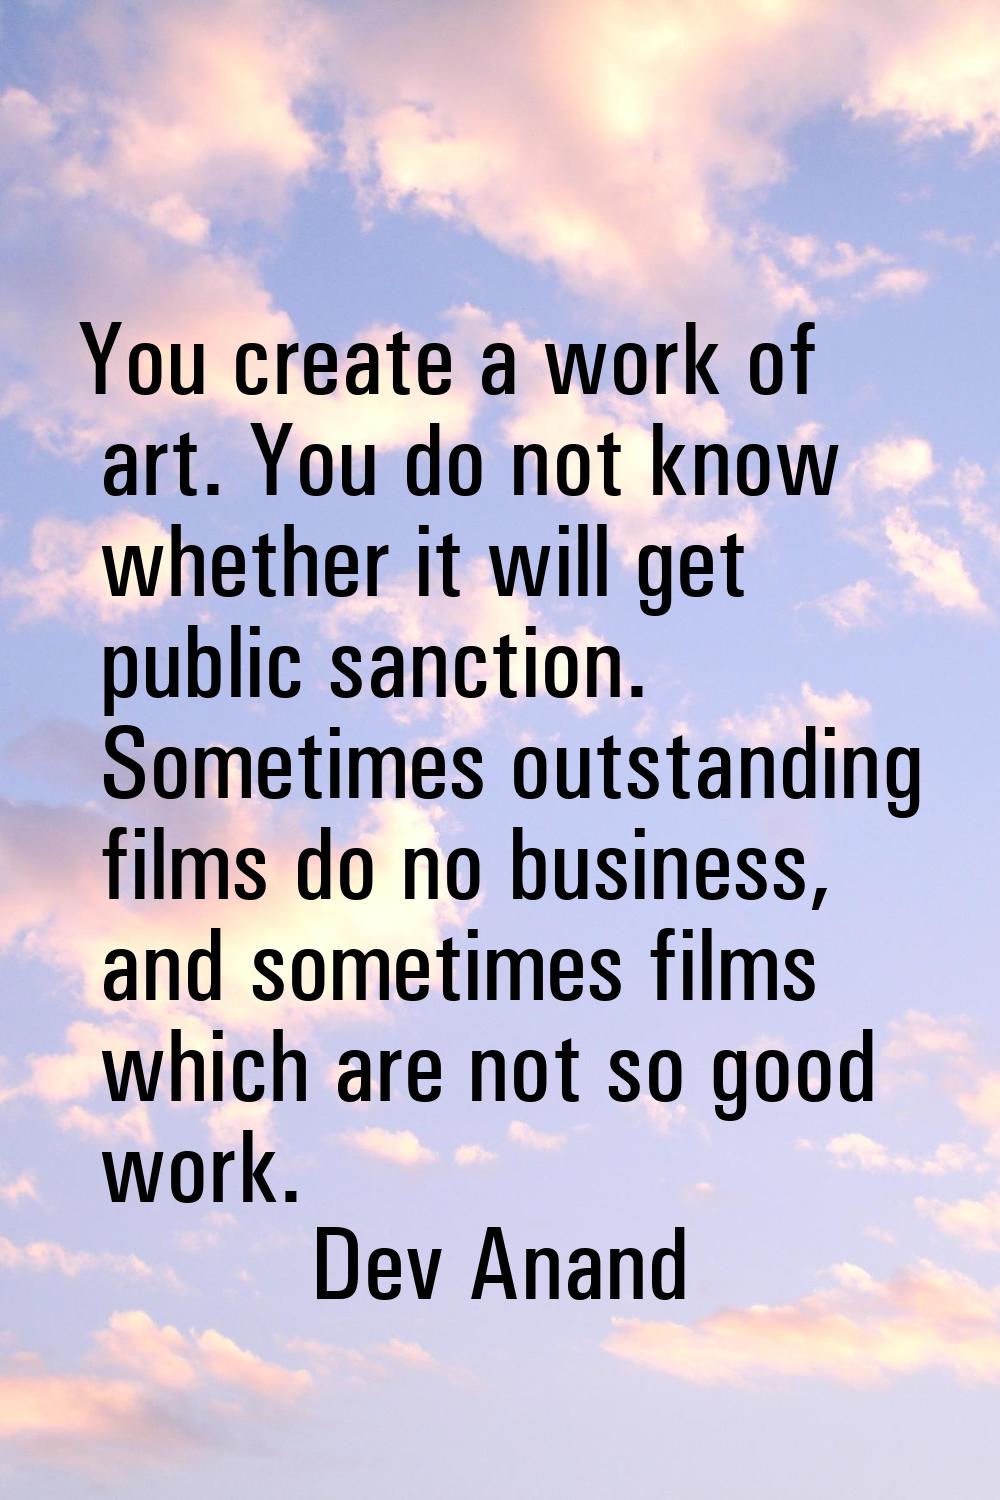 You create a work of art. You do not know whether it will get public sanction. Sometimes outstandin